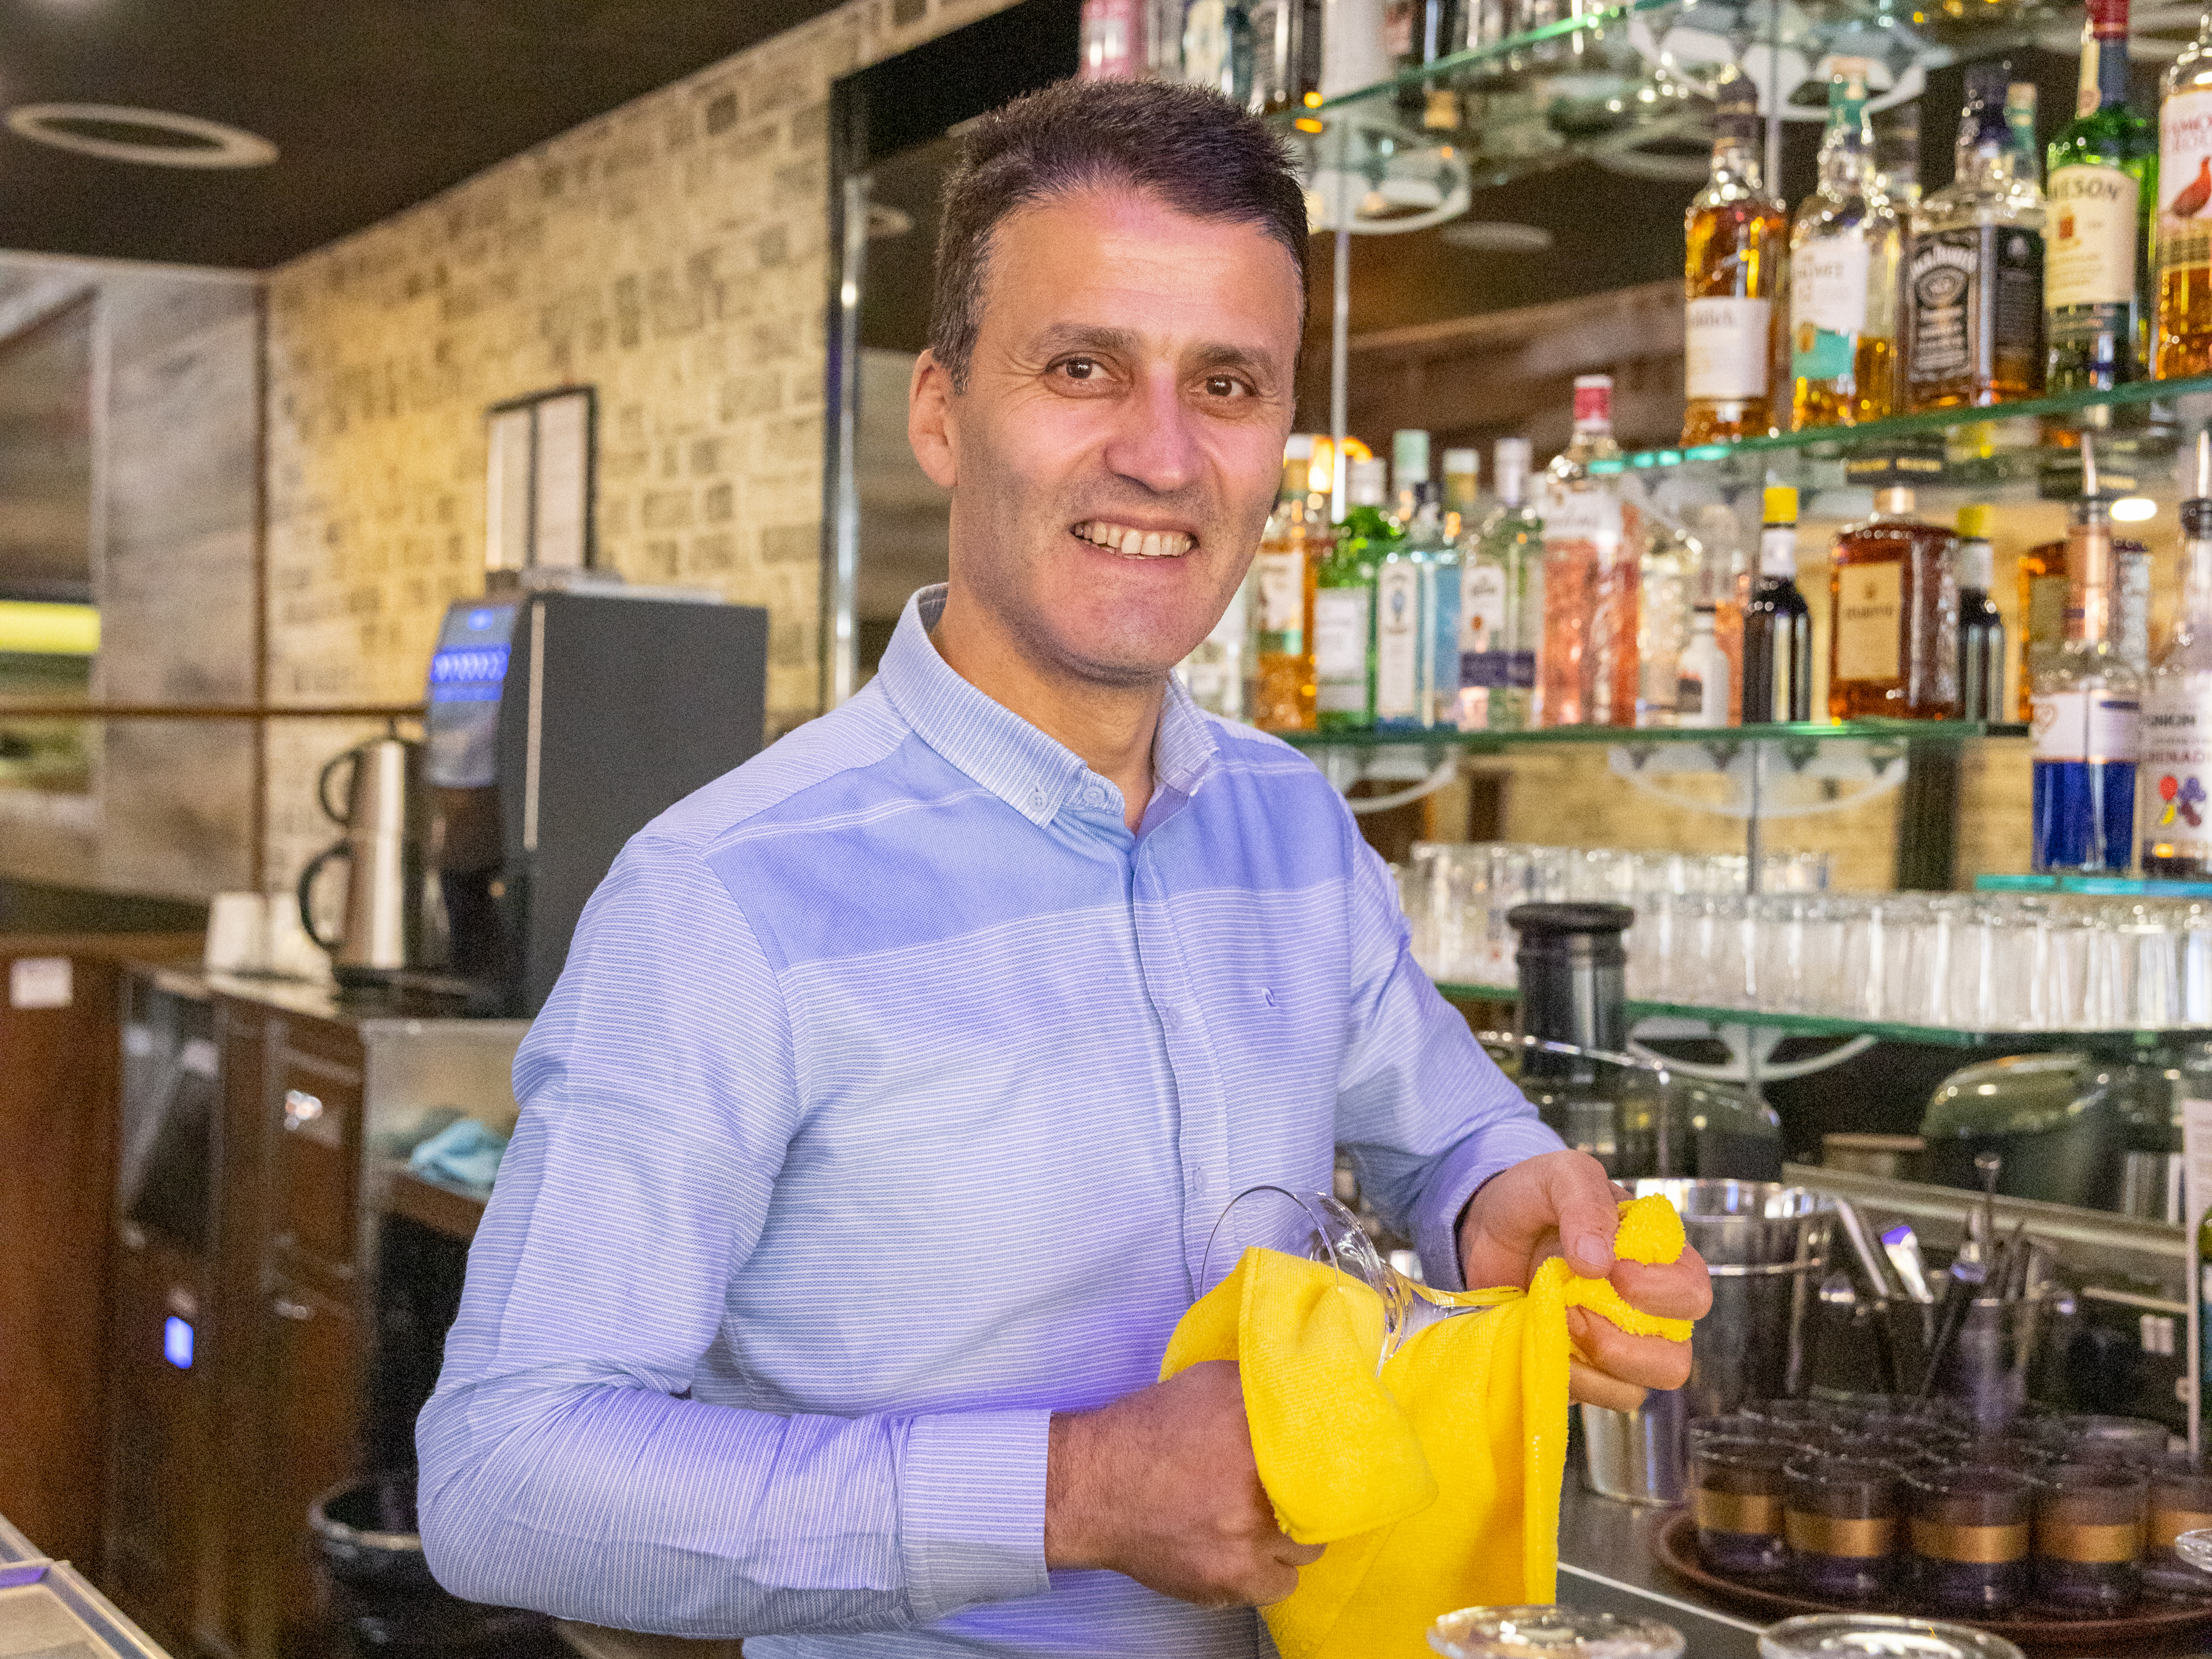 A man stands smiling and looking at the camera. He is cleaning a glass.